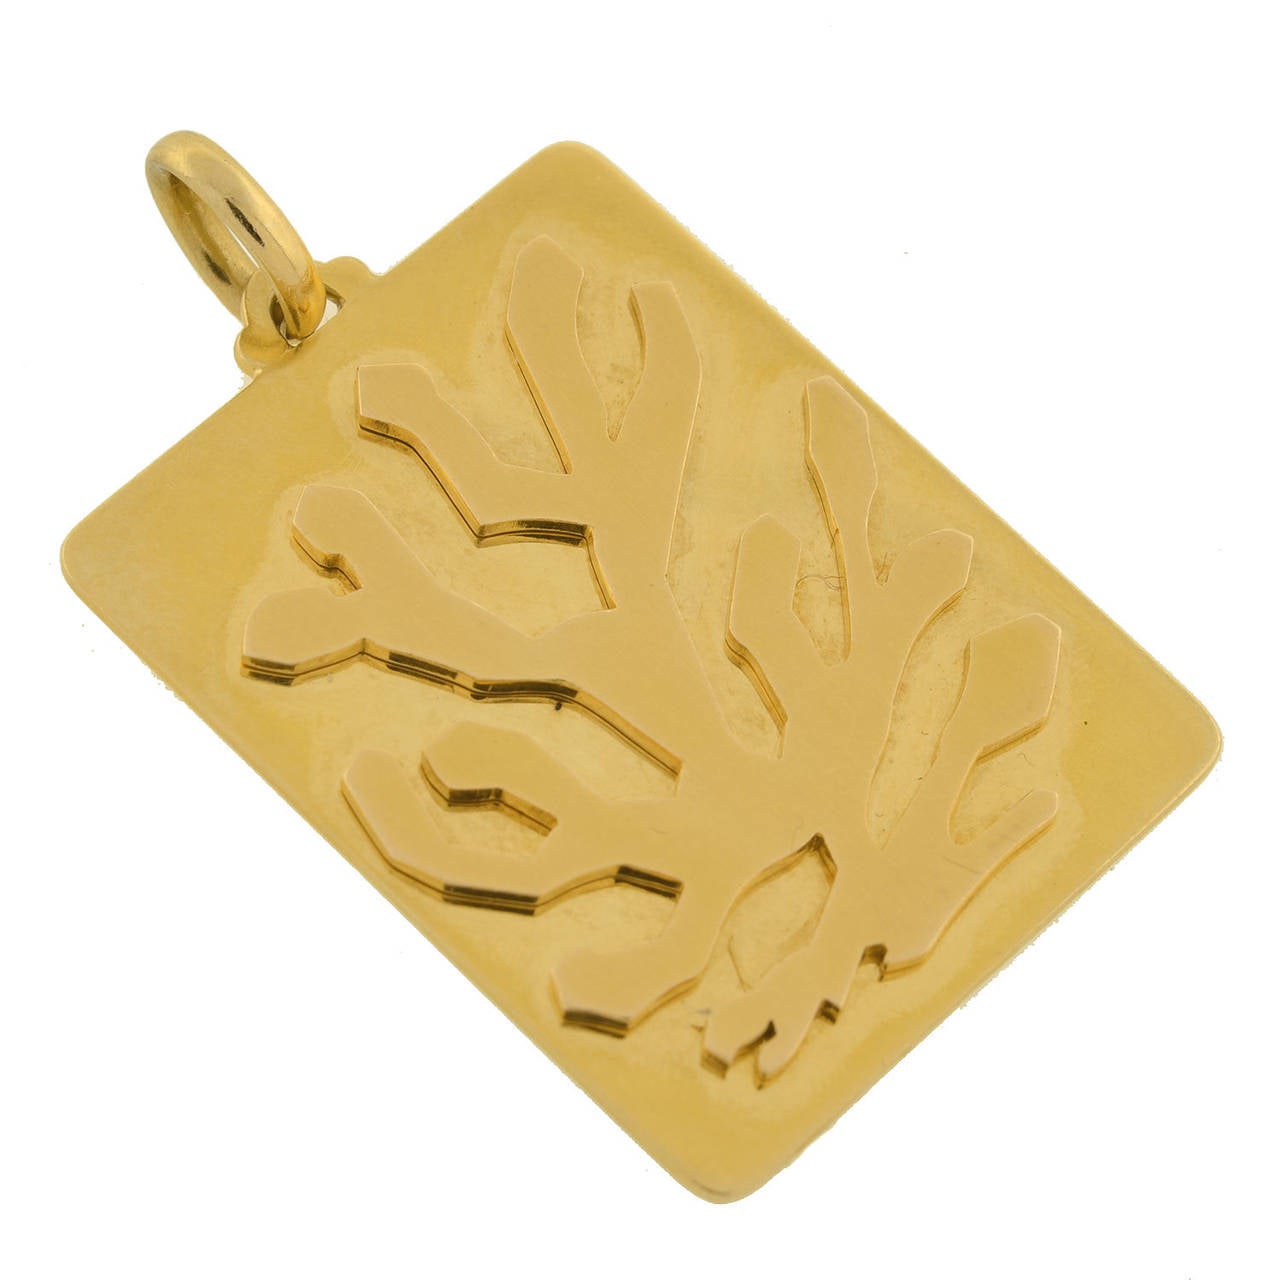 This fabulous vintage pendant is a signed piece by Bvlgari from the 1970's! Made of vibrant 18kt yellow gold, the pendant is very heavy and rather substantial in size. A raised, branch-shaped design decorates the top of a large rectangular gold